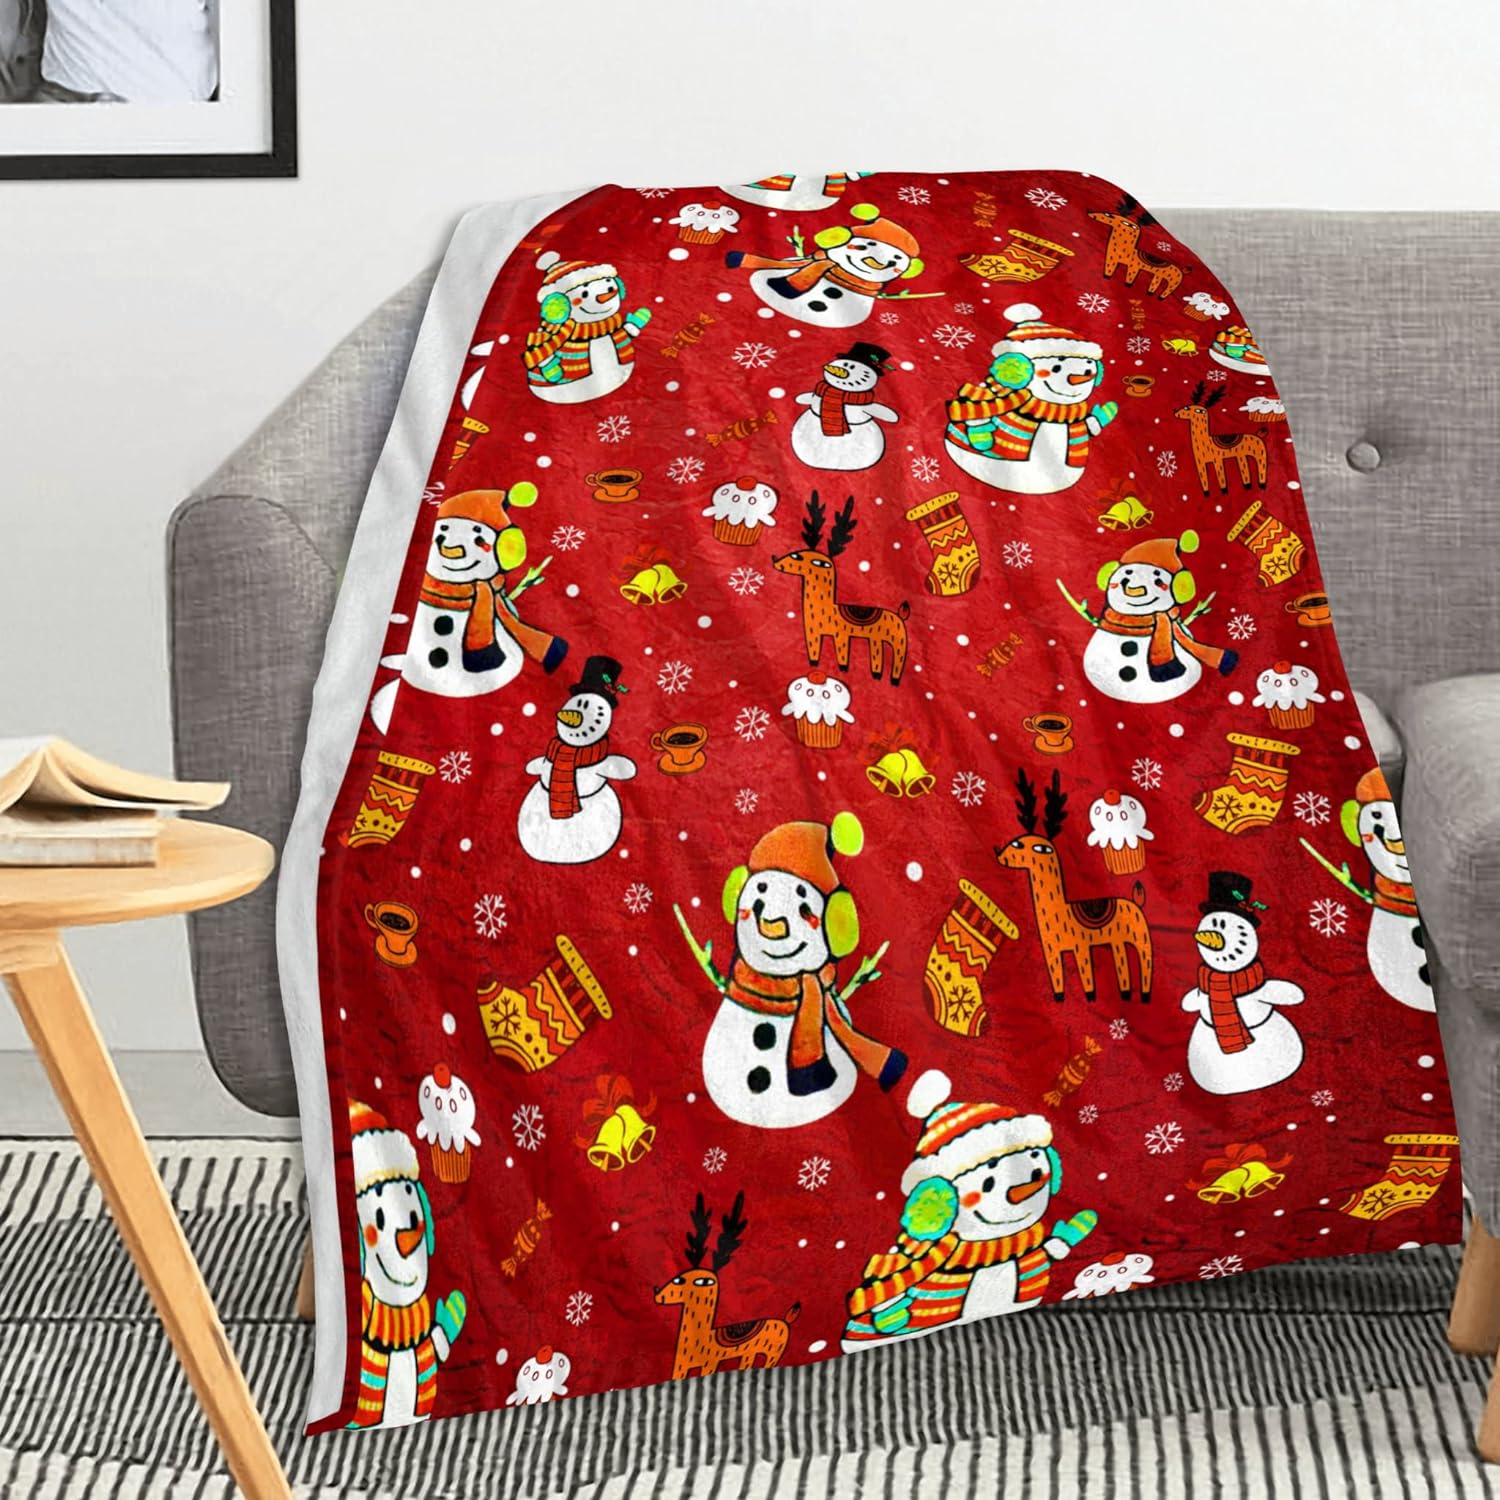 Great Choice Products Soft Plush Christmas Blanket,Christmas Snowman Deer Bell Socks Warm Throw Blanket For Couch, Seasonal Winter Xmas Holida…